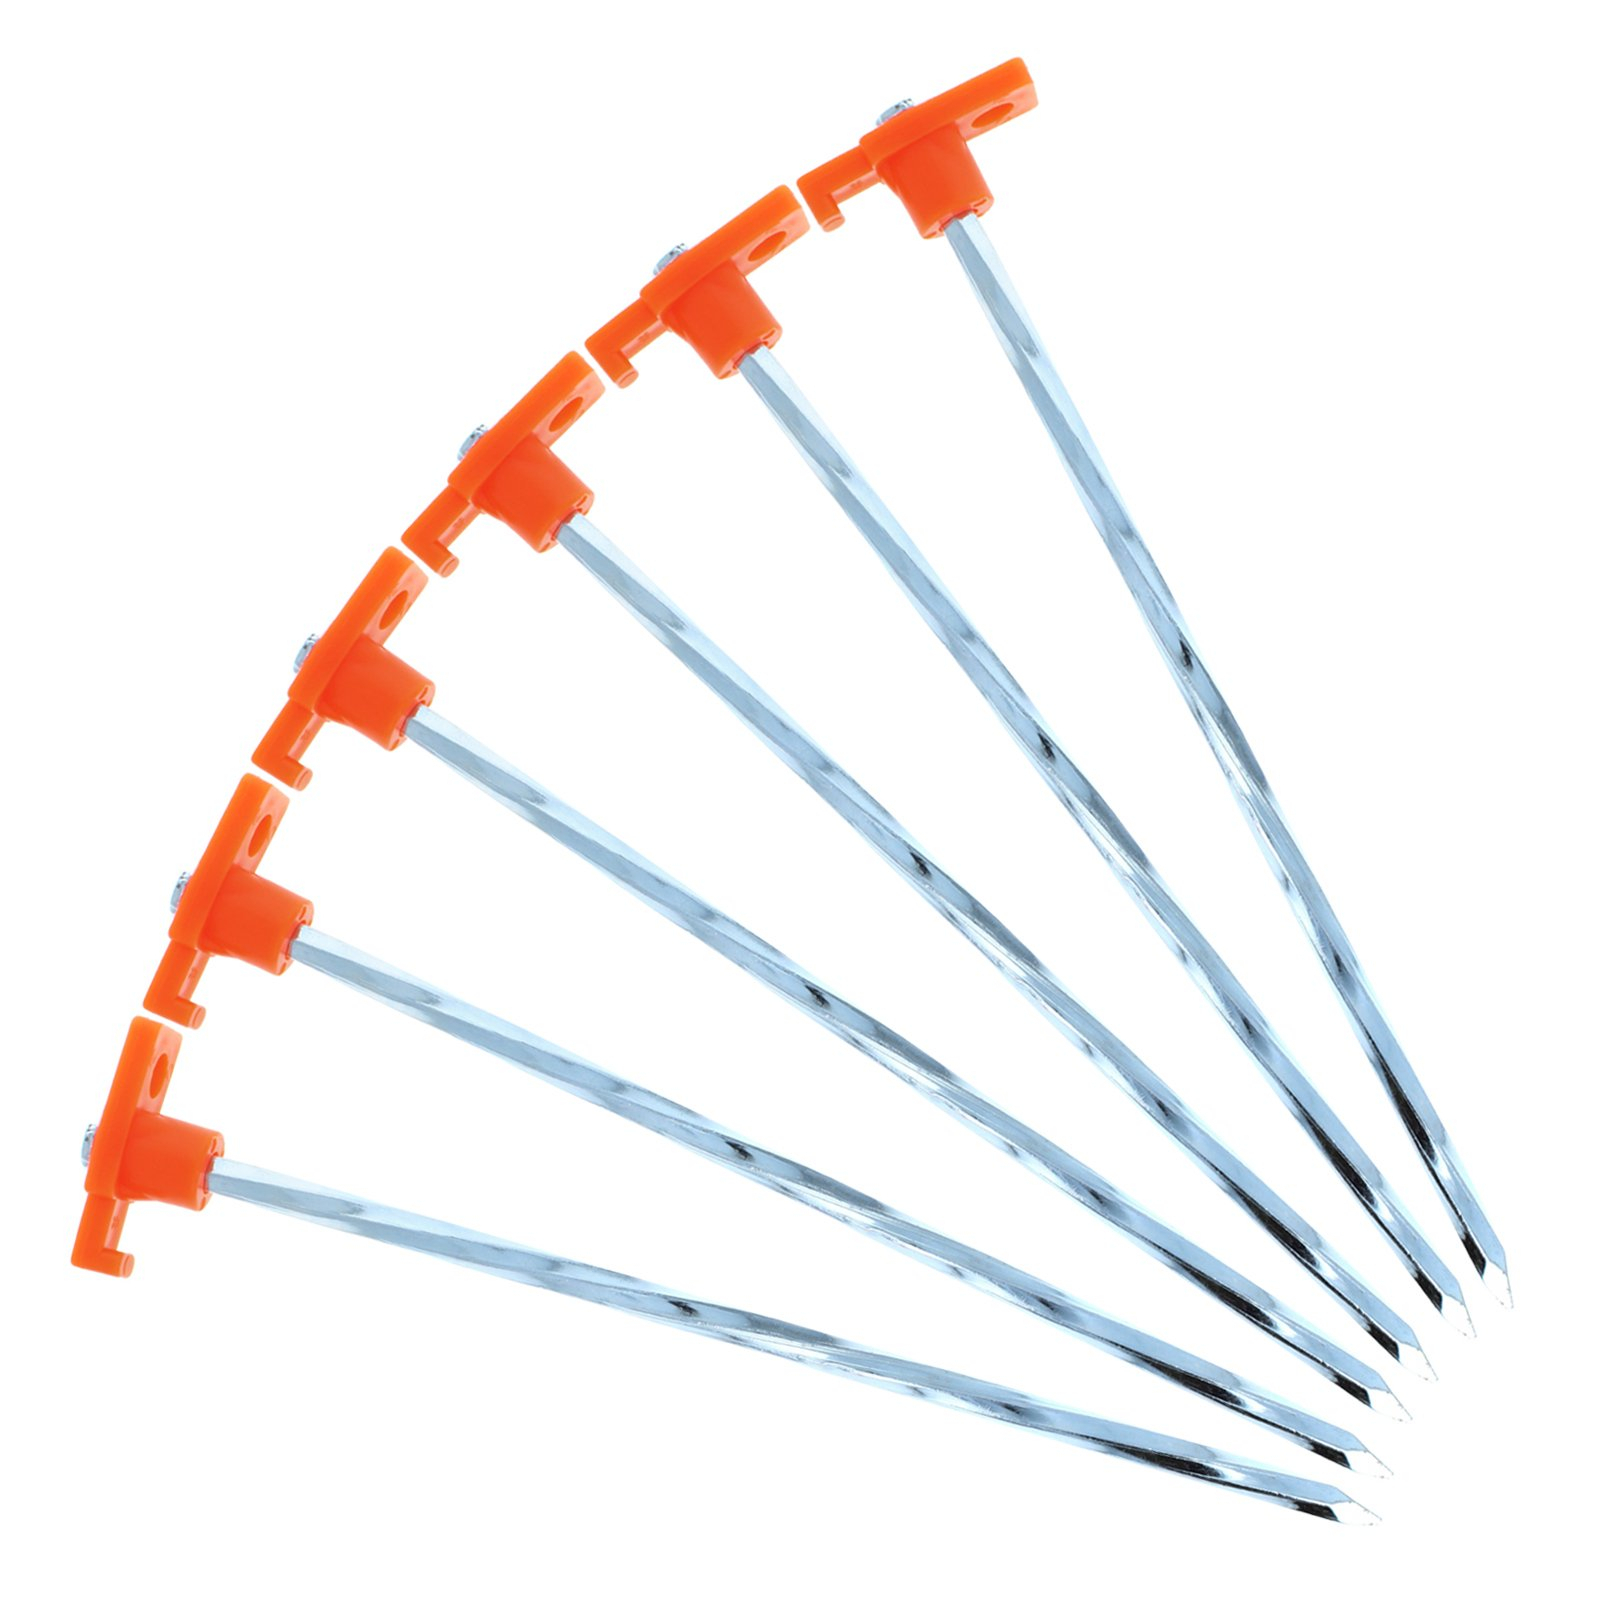 (6 Pack) ASR Outdoor Orange Universal Galvanized Twisted Metal PVC Camping Gear Canopy Tent Stakes - image 1 of 7